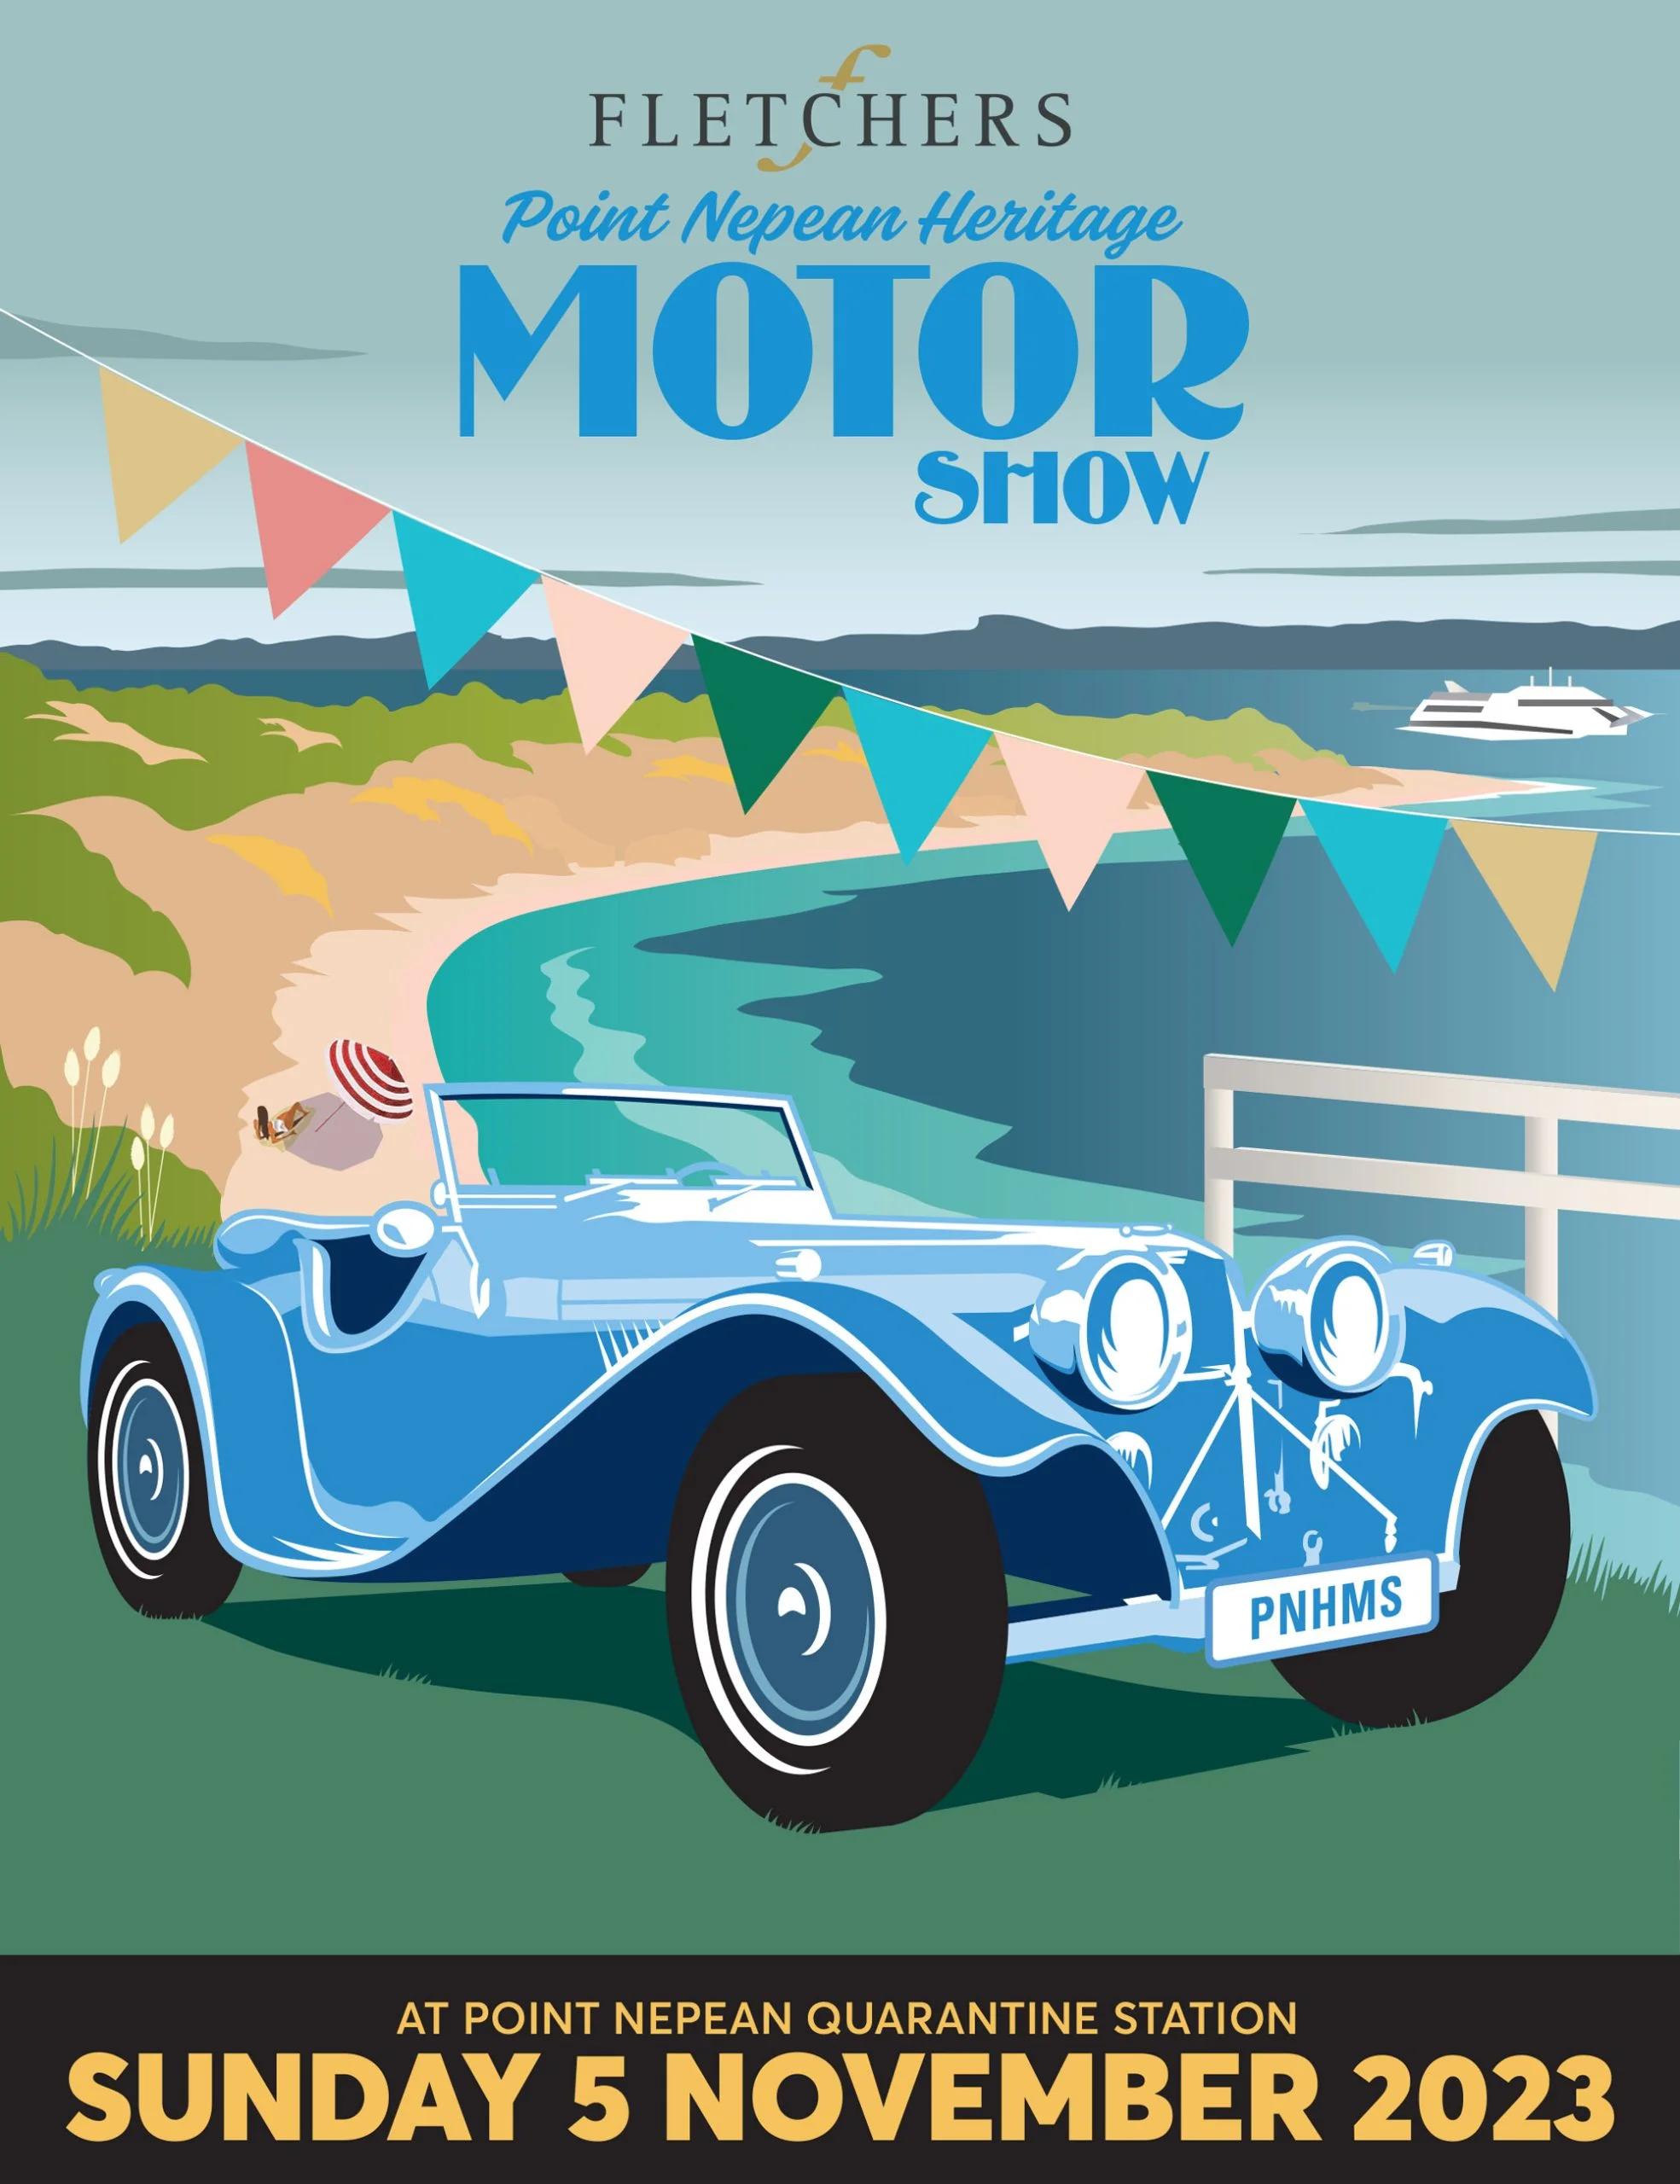 Fletchers Point Nepean Heritage Motor Show 2023 EVENT POSTER scaled 1